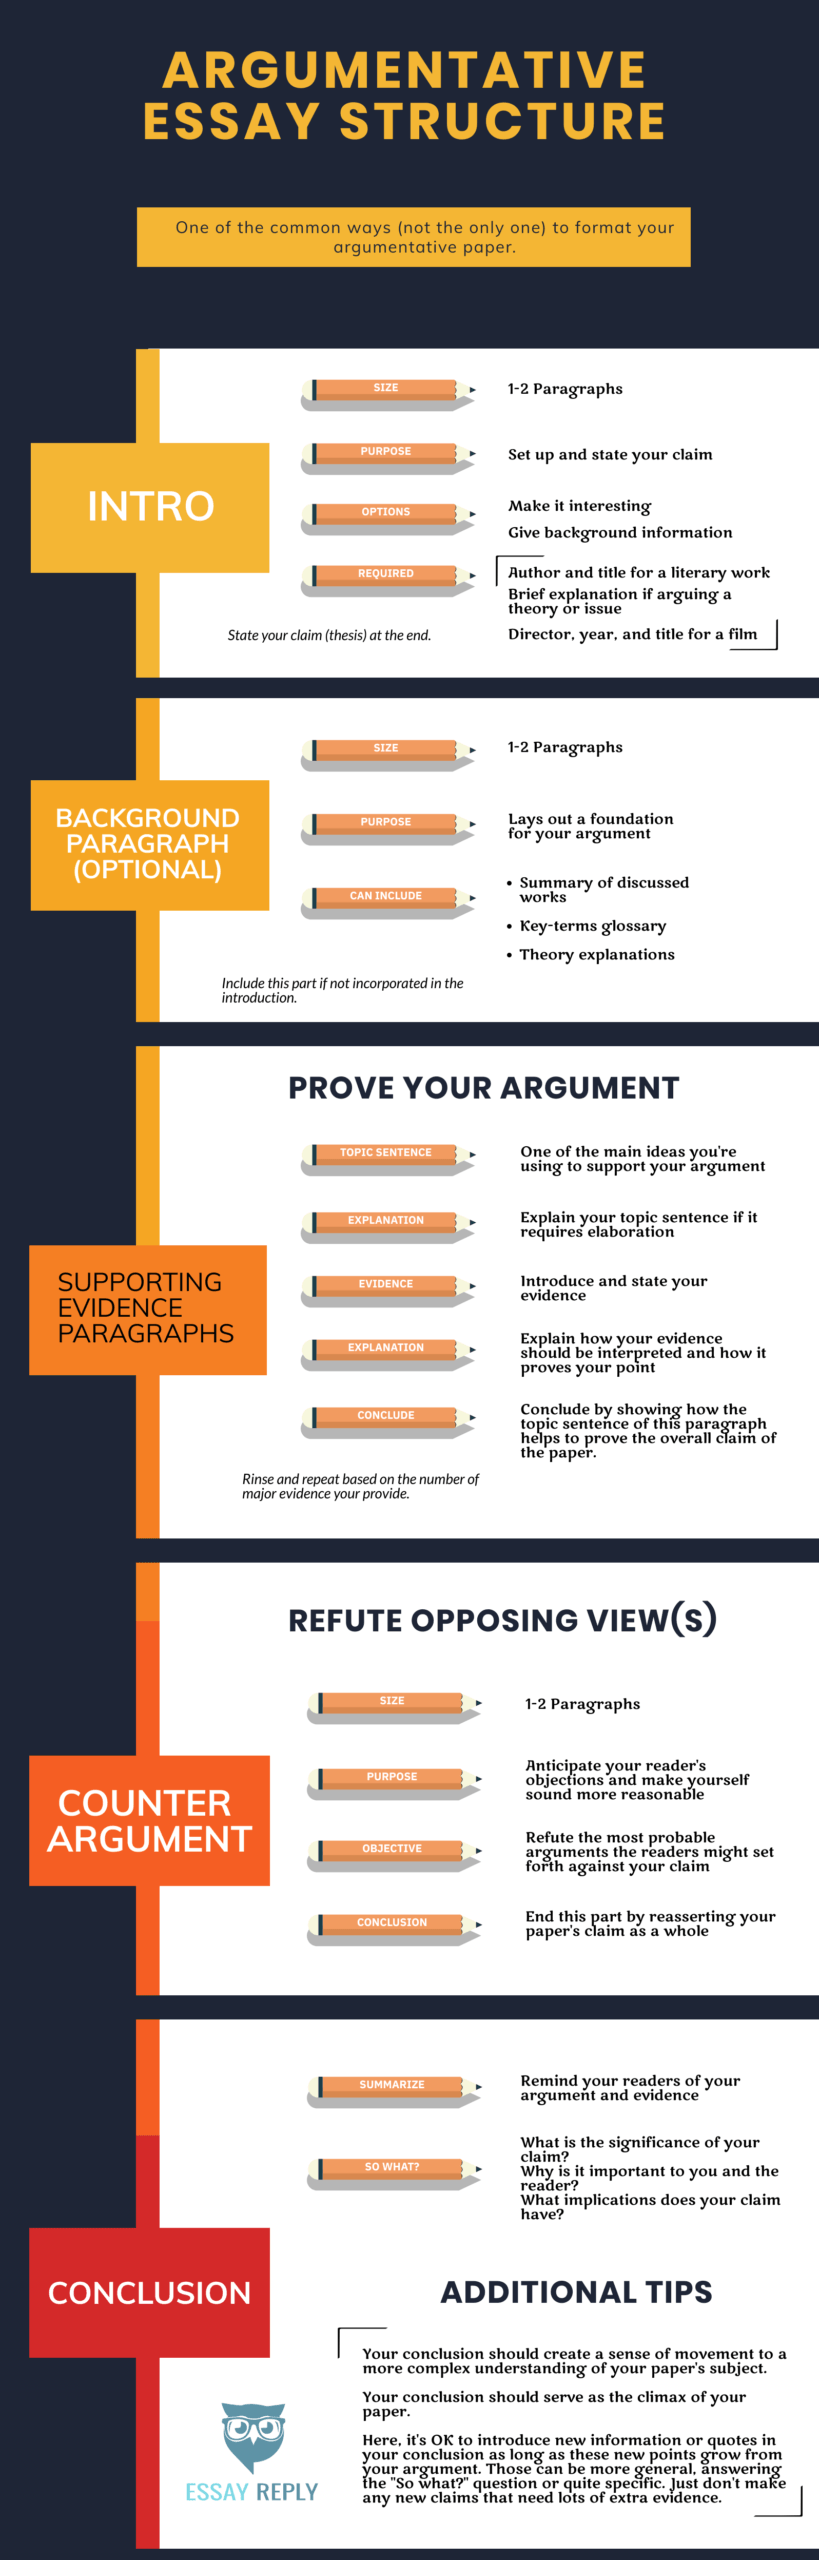 format for writing an argumentative essay